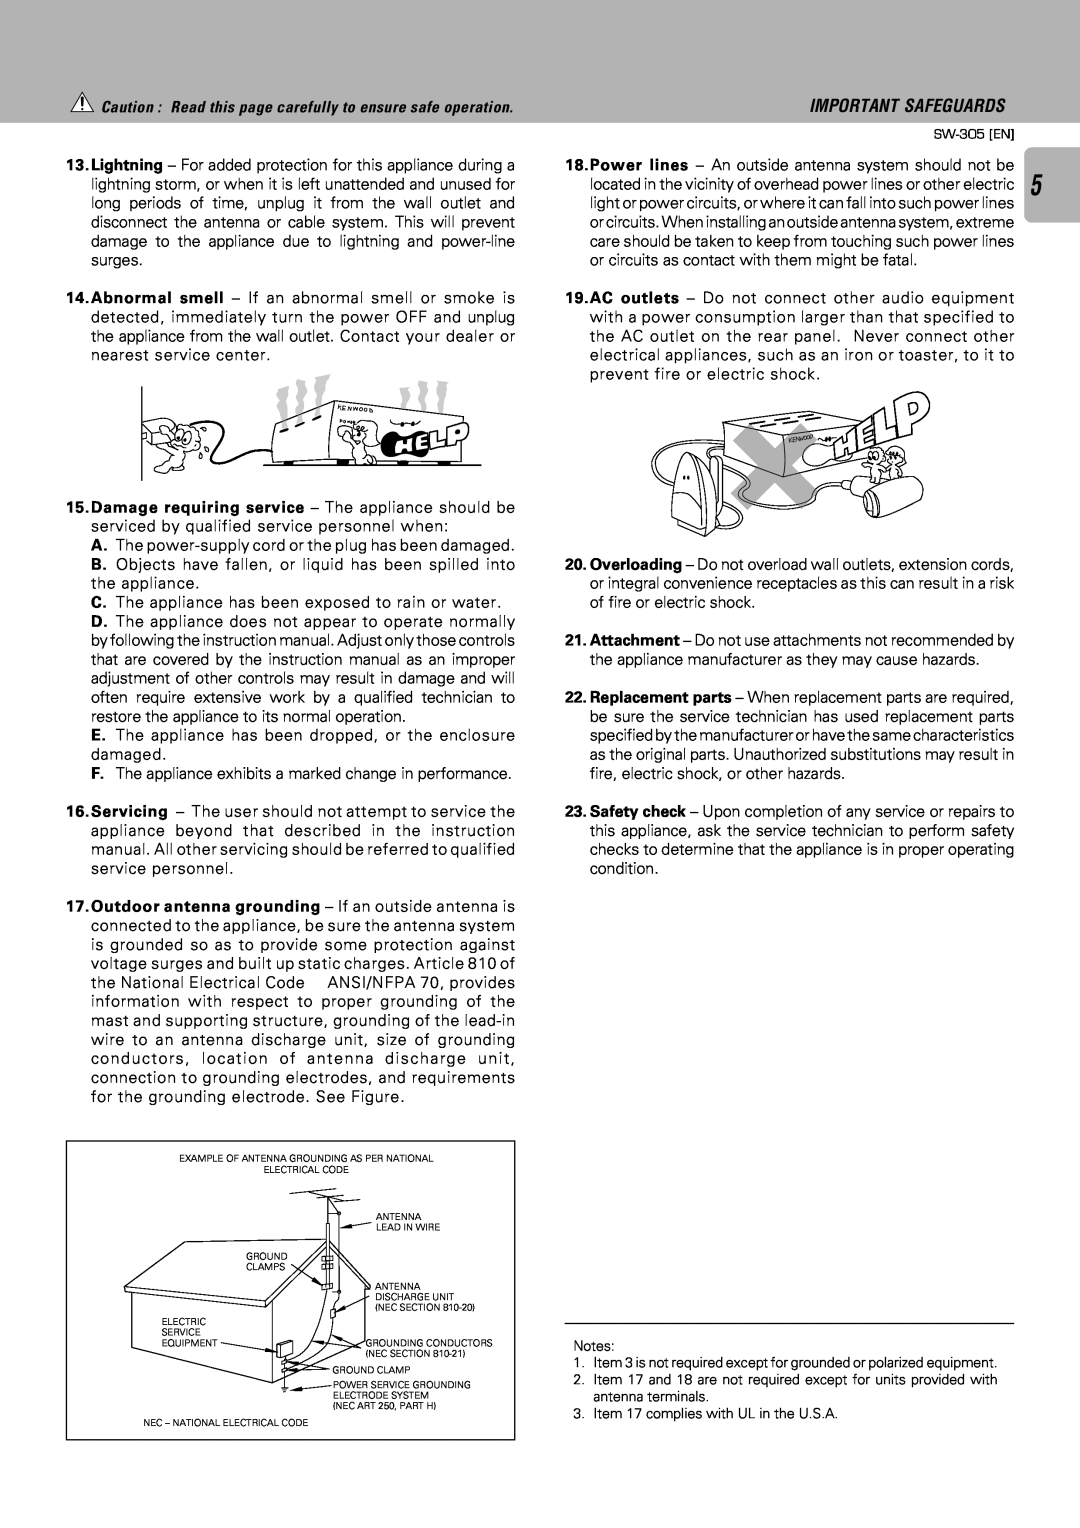 Kenwood SW-505D, SW-305 instruction manual Important Safeguards, Caution Read this page carefully to ensure safe operation 